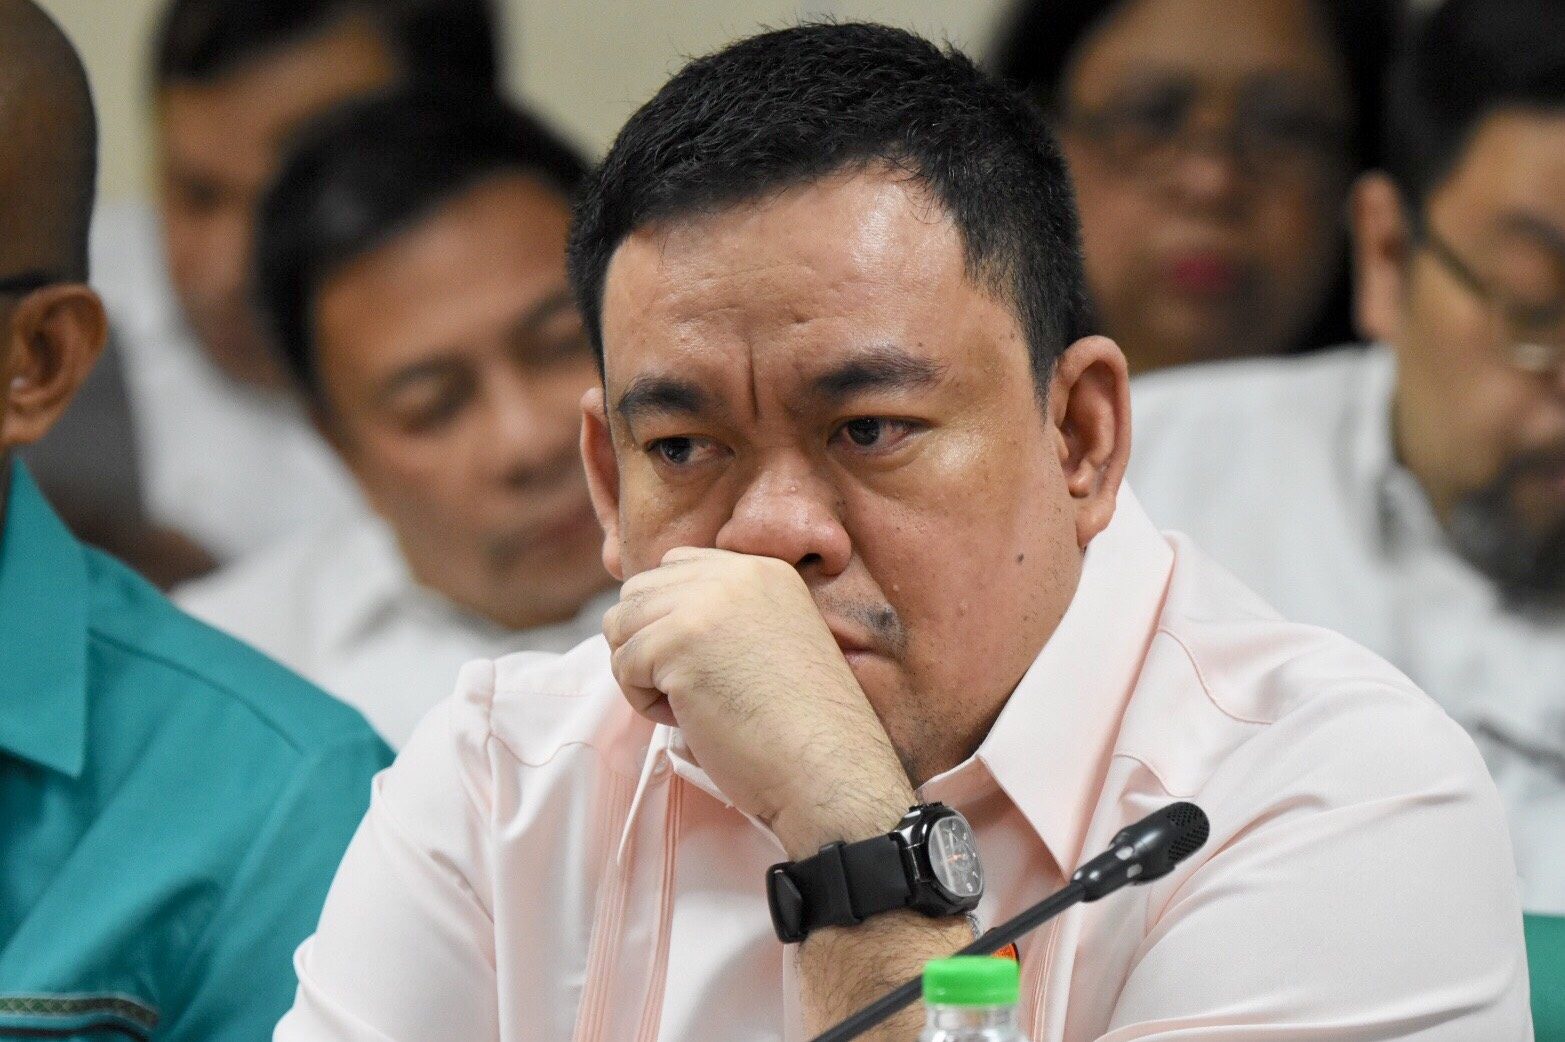 Bets in narco list? Comelec stresses need for due process